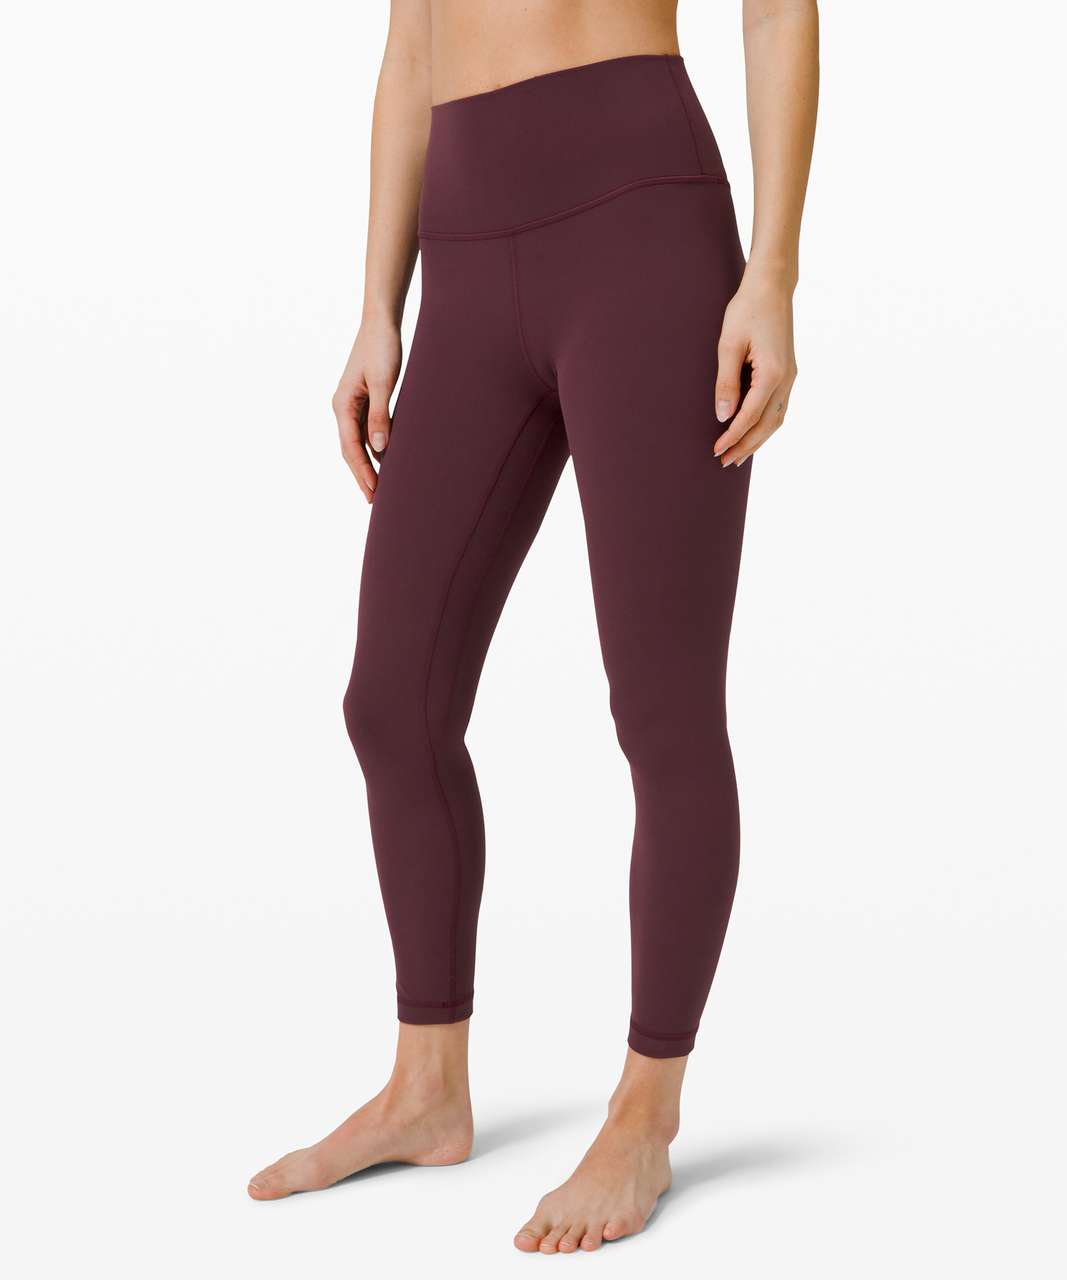 Lululemon Align Pant II 25" - Cassis (First Release)